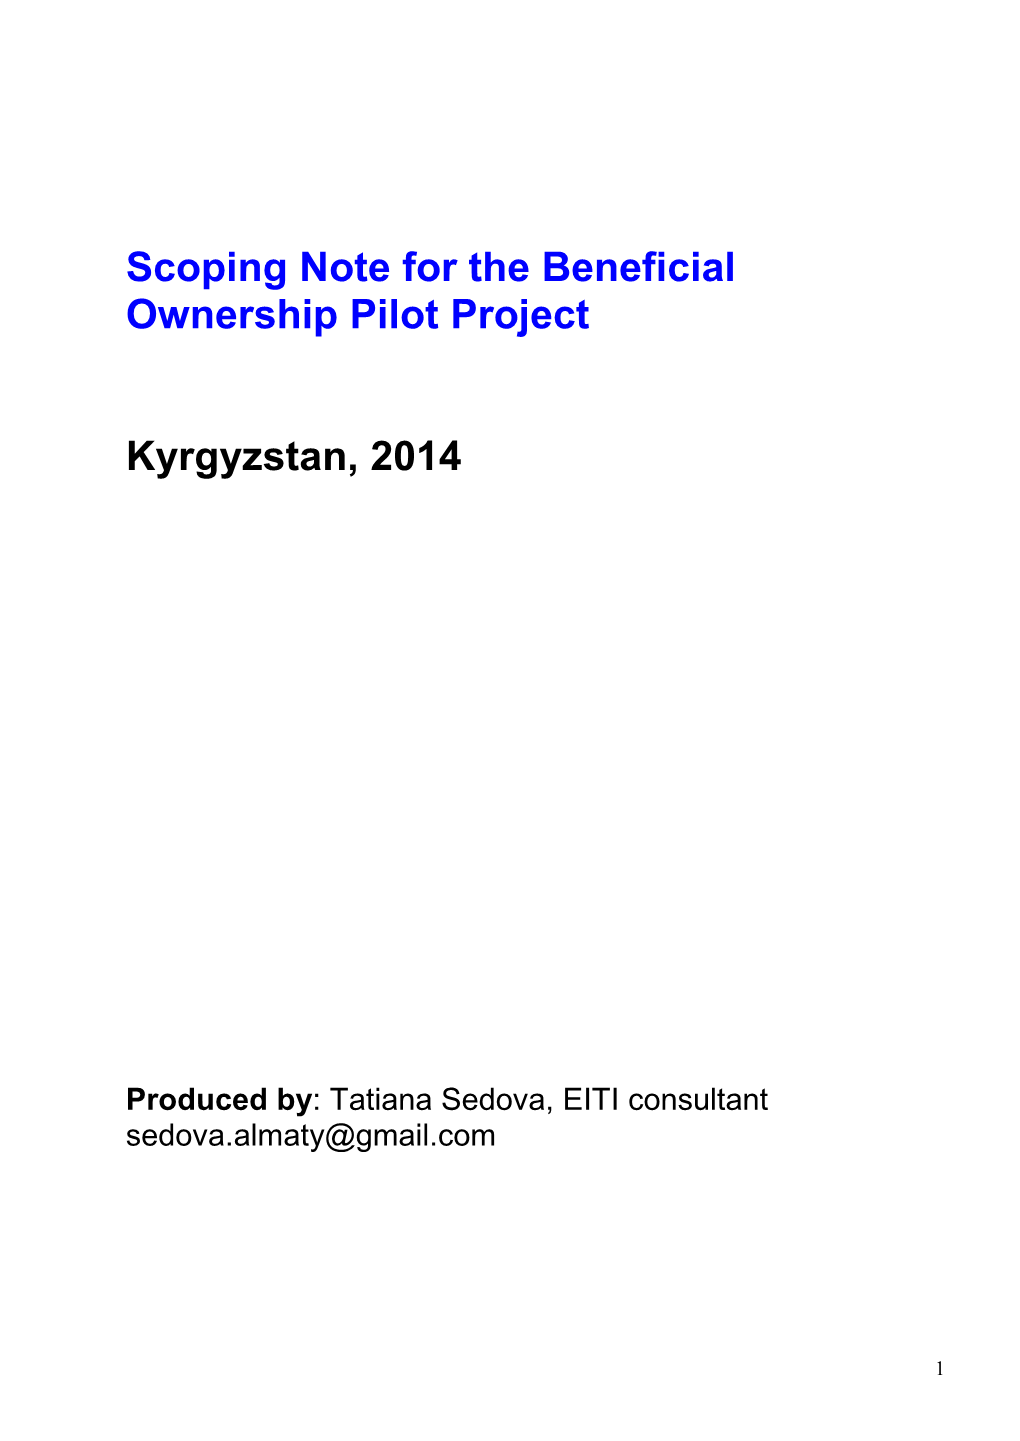 Scoping Note for the Beneficial Ownership Pilot Project Kyrgyzstan, 2014